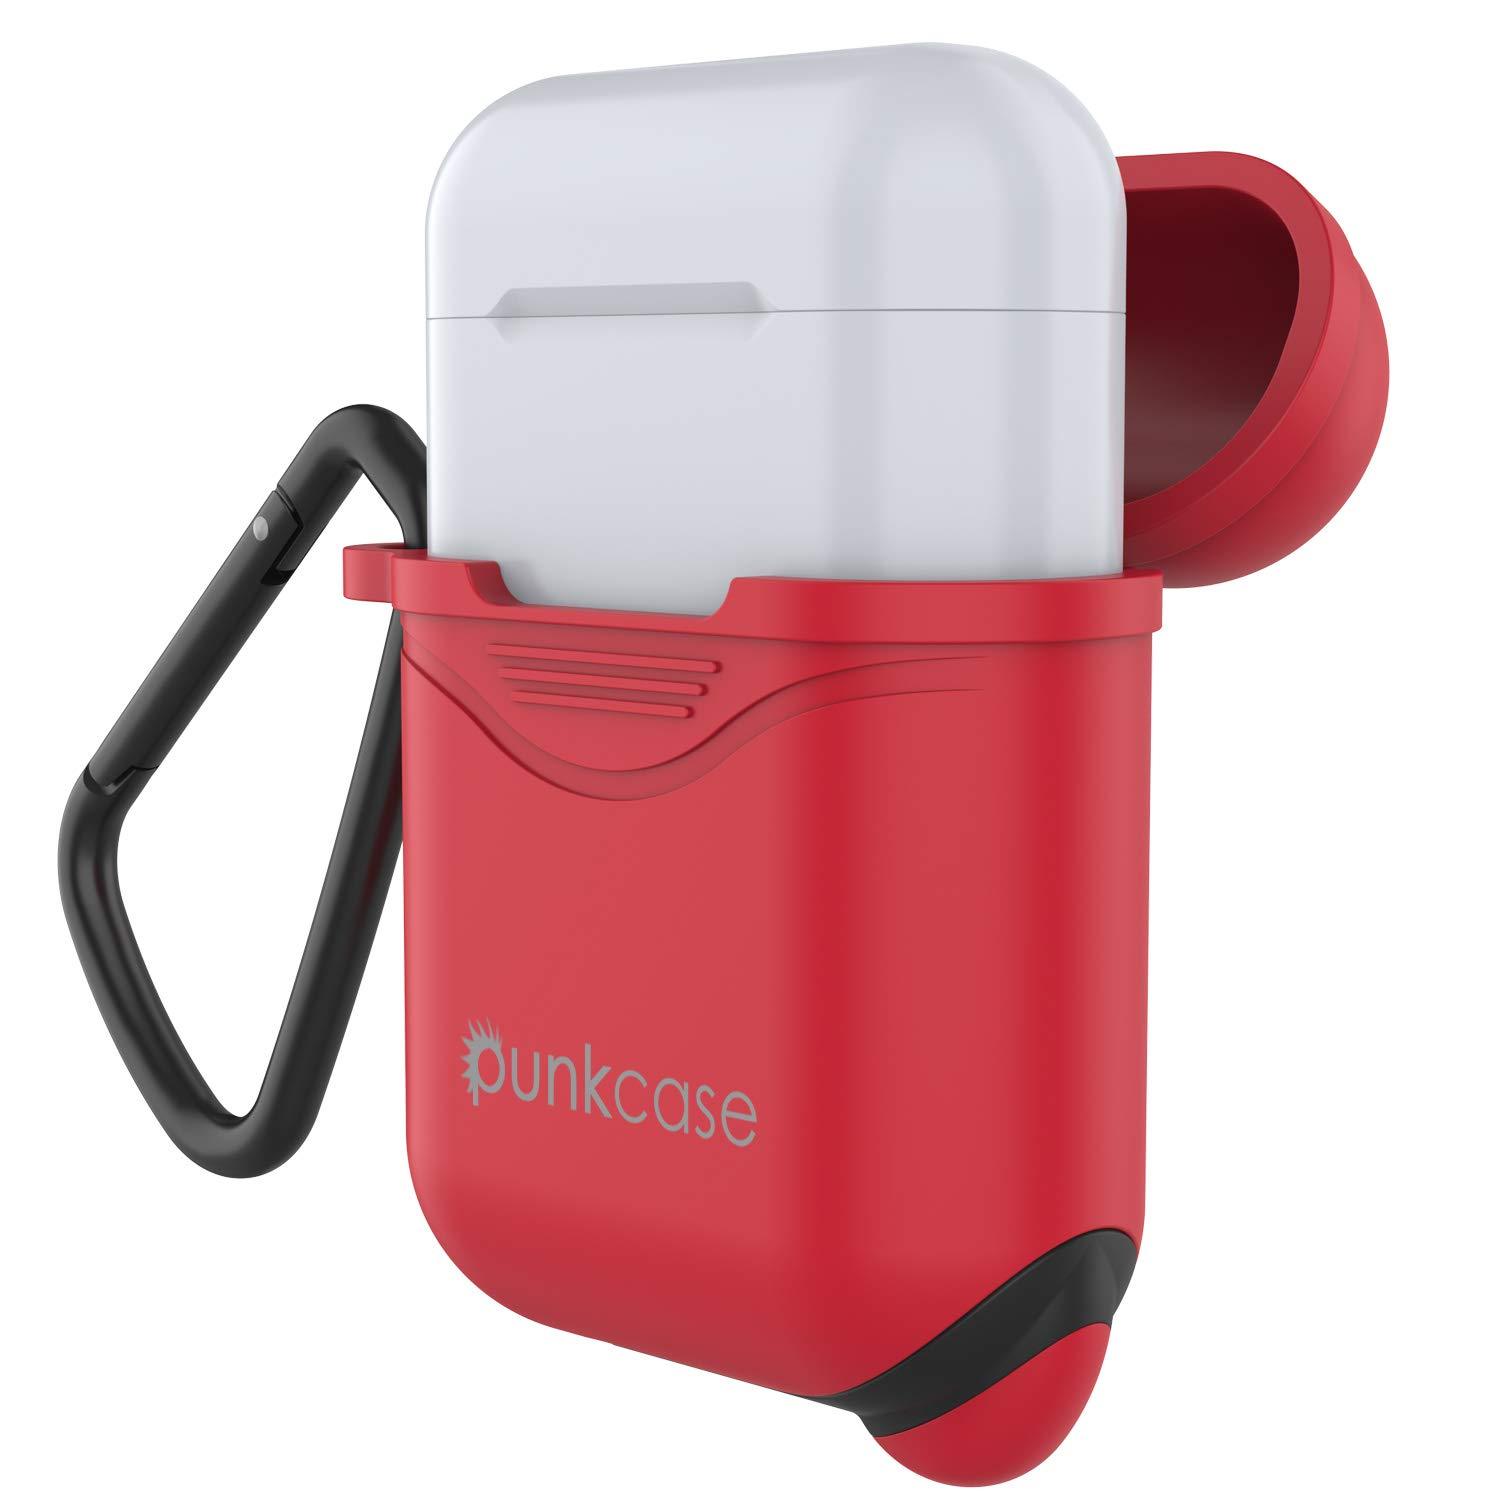 Punkcase Airpod Case with Keychain (Red)